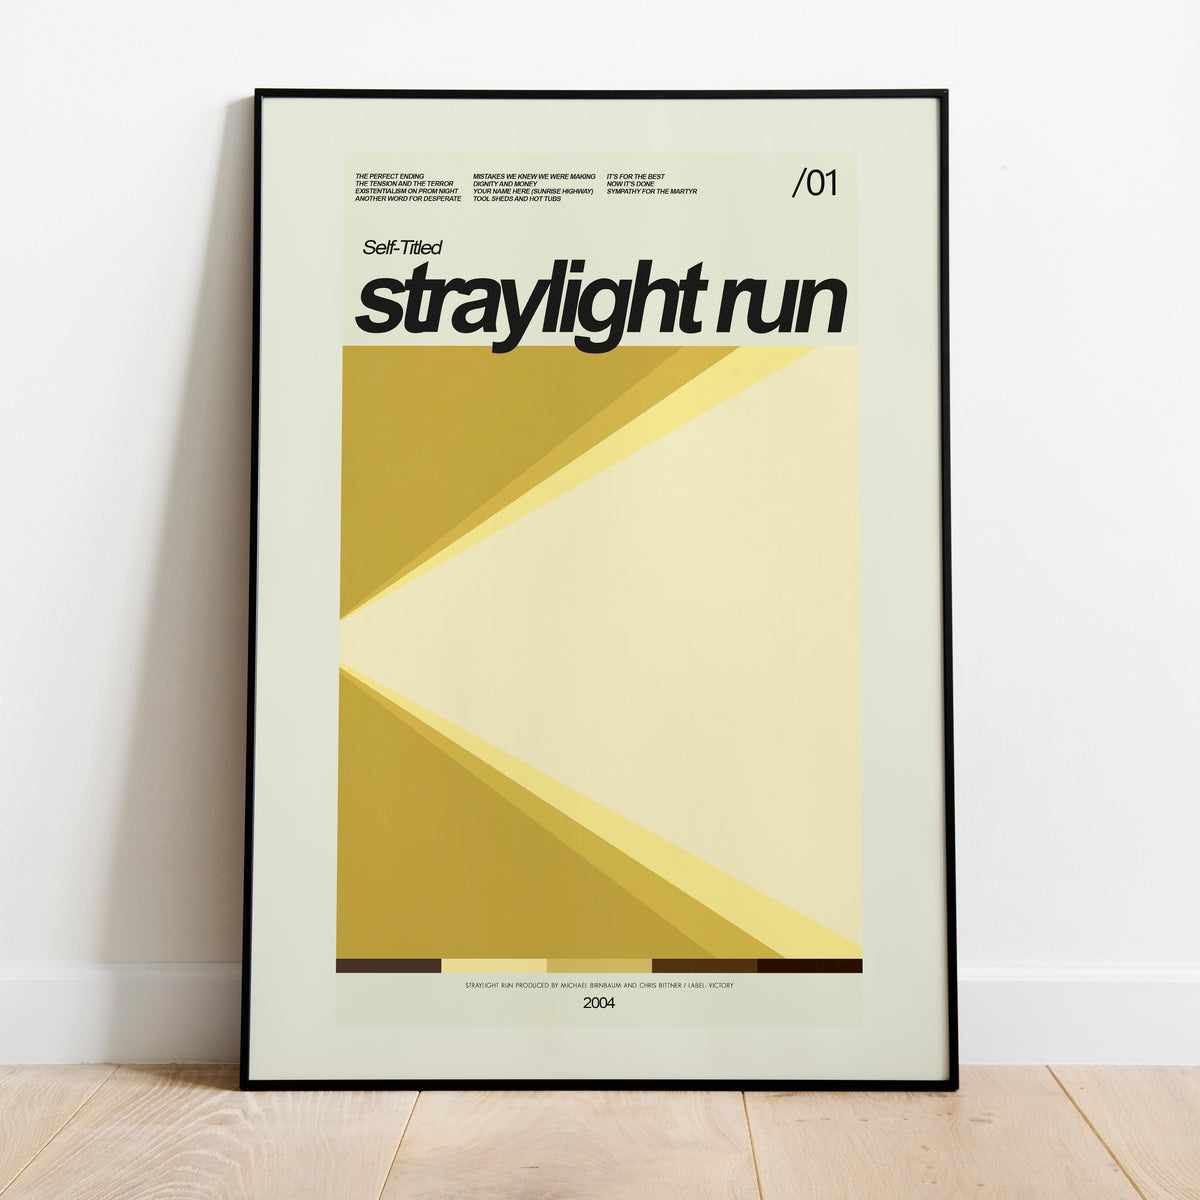 Straylight Run - Self-Titled (album) Inspired | 12"x18" or 18"x24" Print only